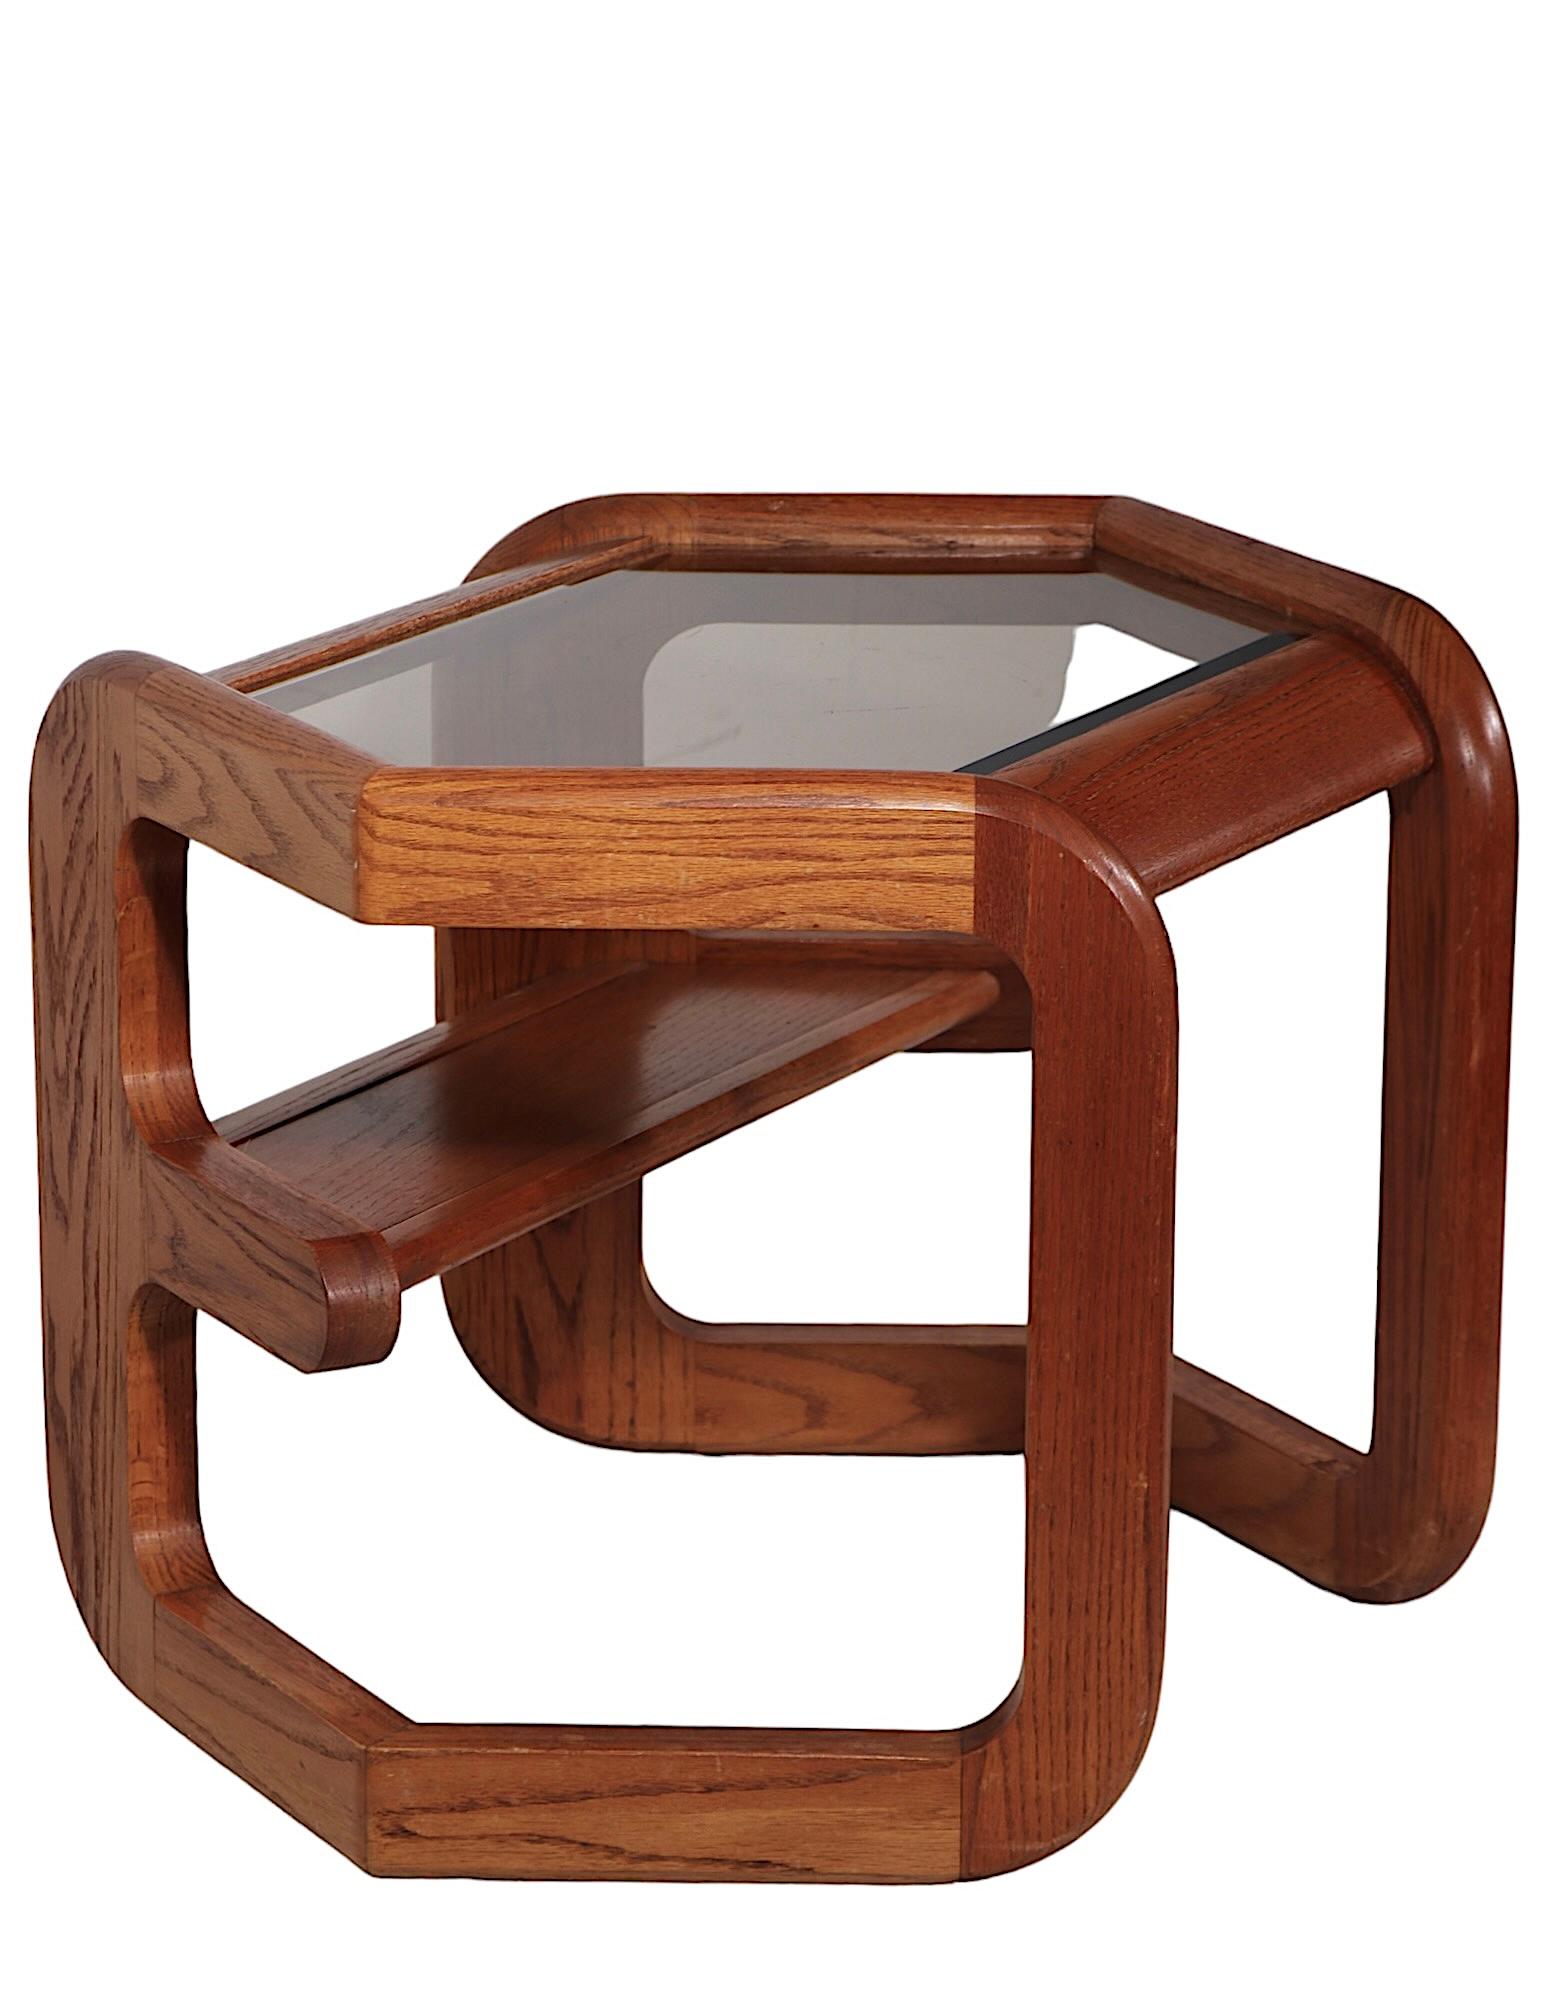 Exceptional post modern side, or end table, designed by Lou Hodges for Mersman, c. 1970's. The table features a sculptural  octagonal solid oak frame, with a bevelled tinted  glass top. This example is in very fine, original, clean and ready to use